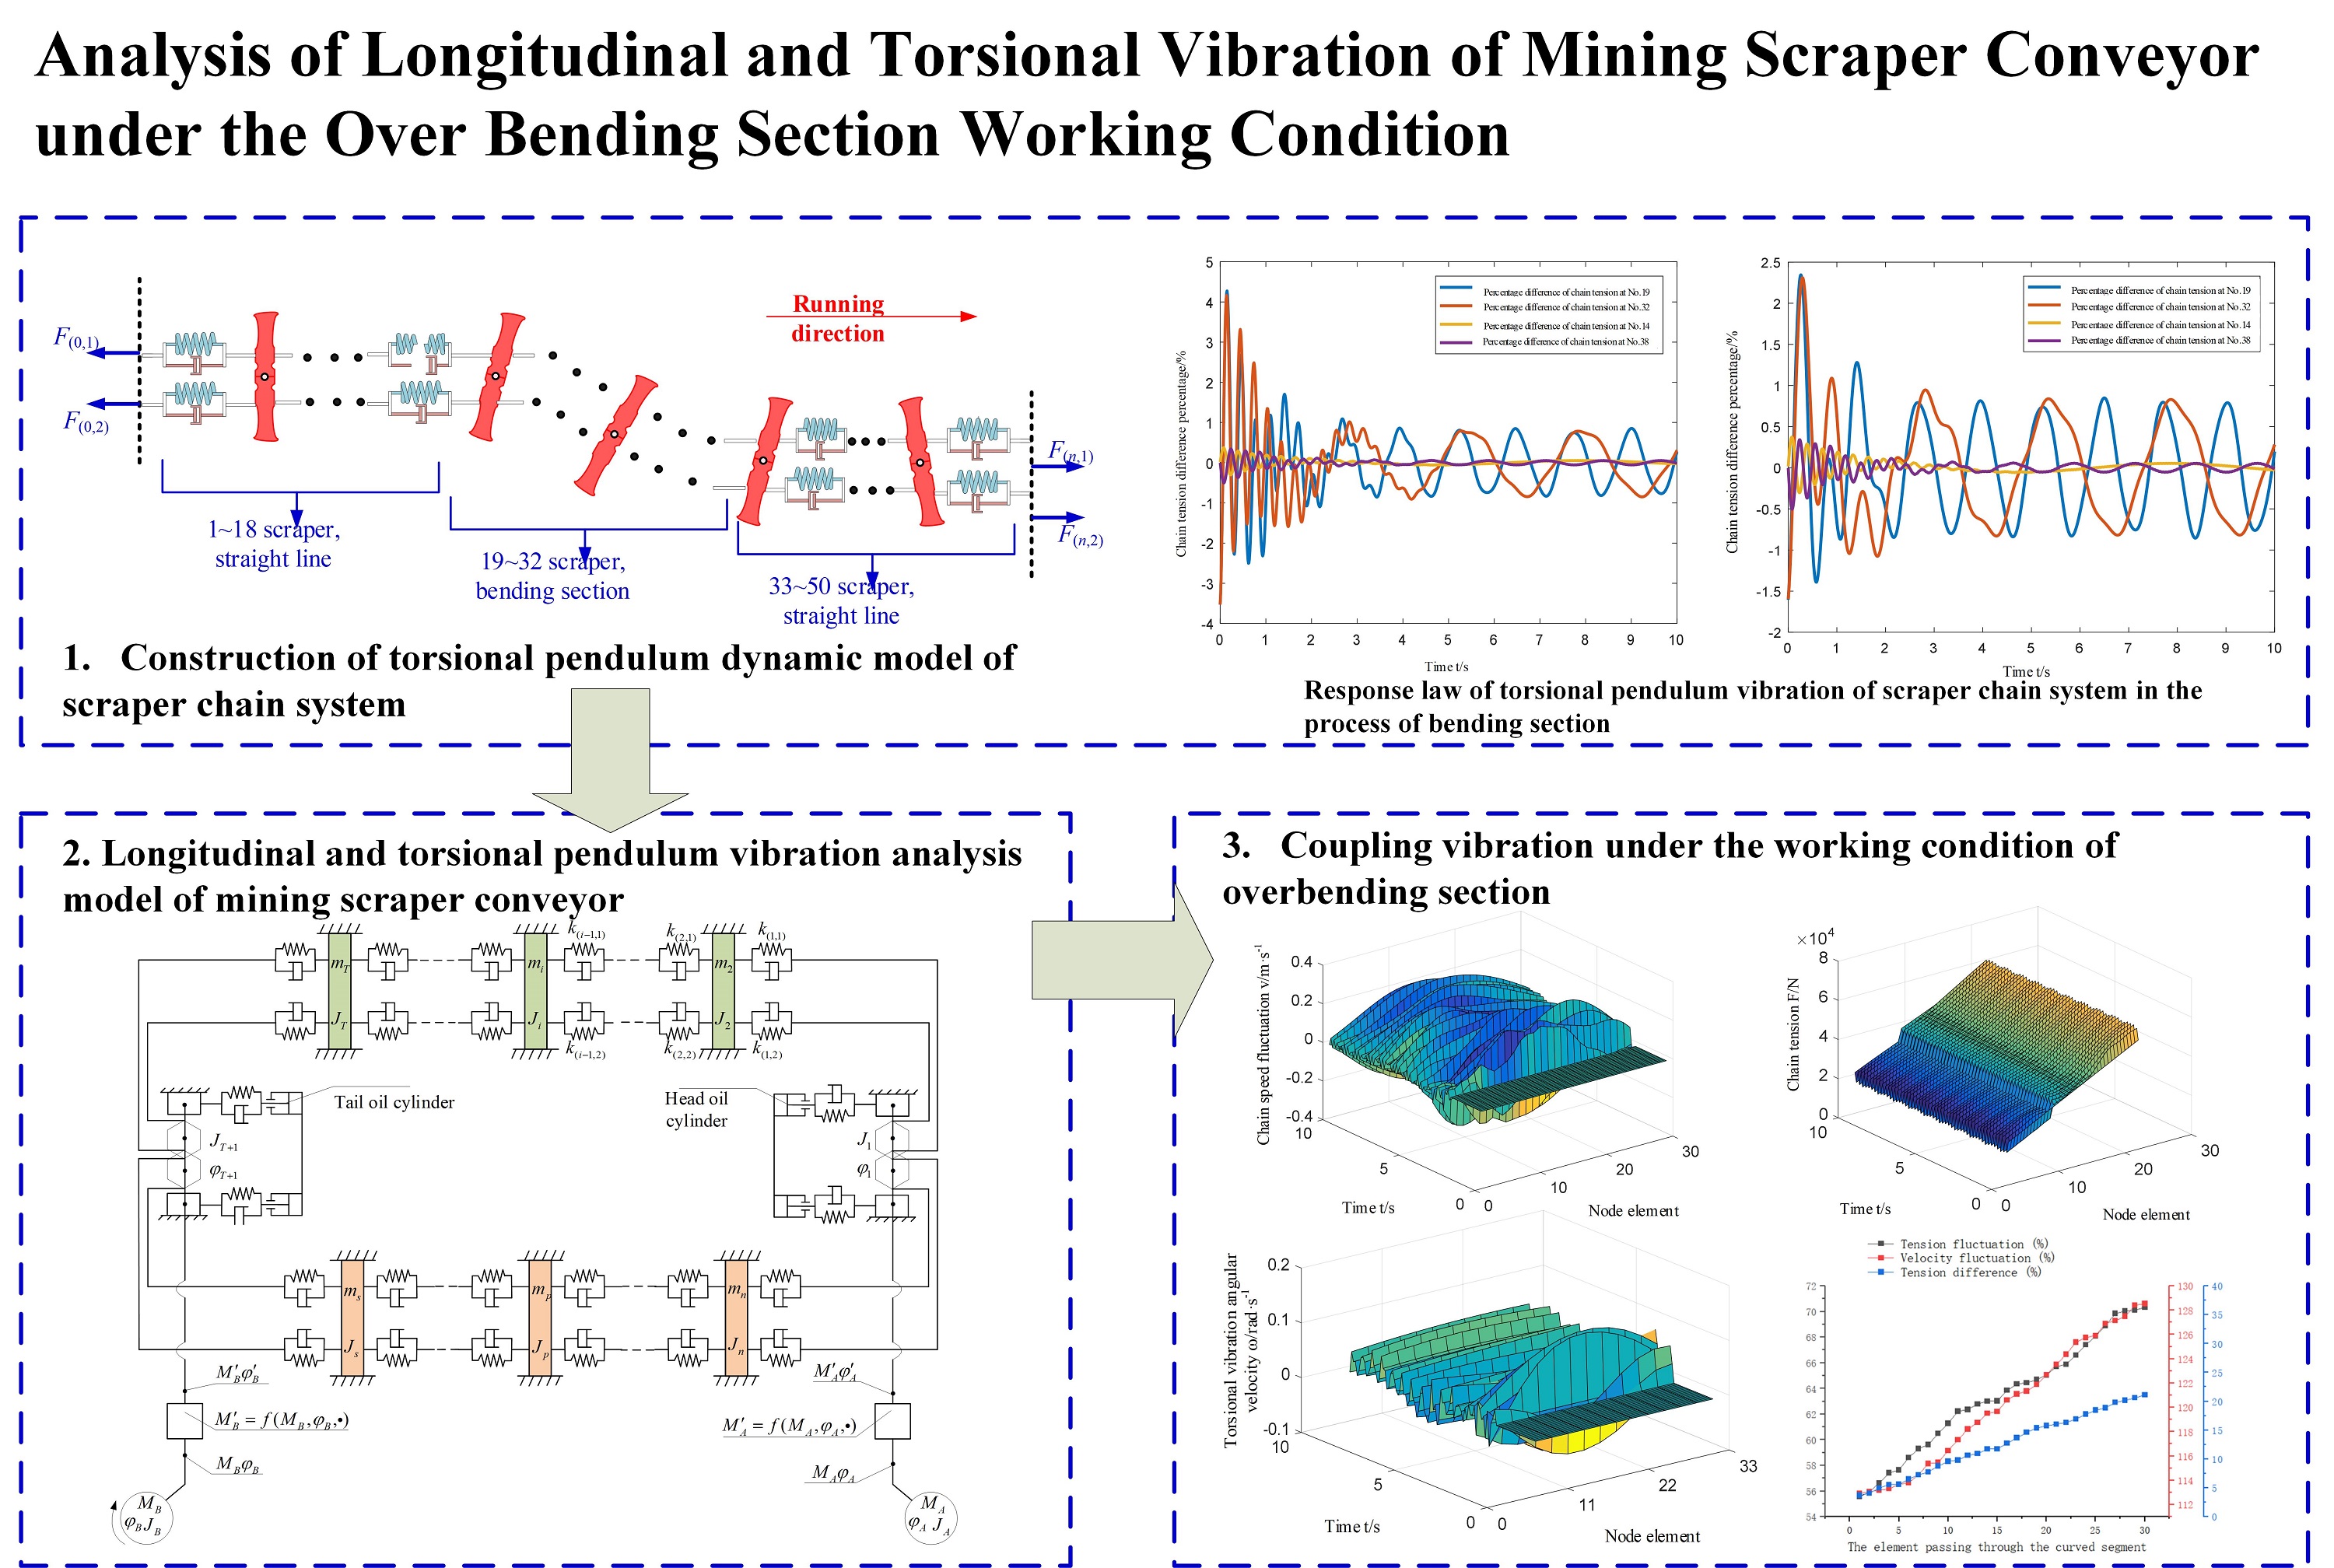 Analysis of longitudinal and torsional vibration of mining scraper conveyor under the over bending section working condition